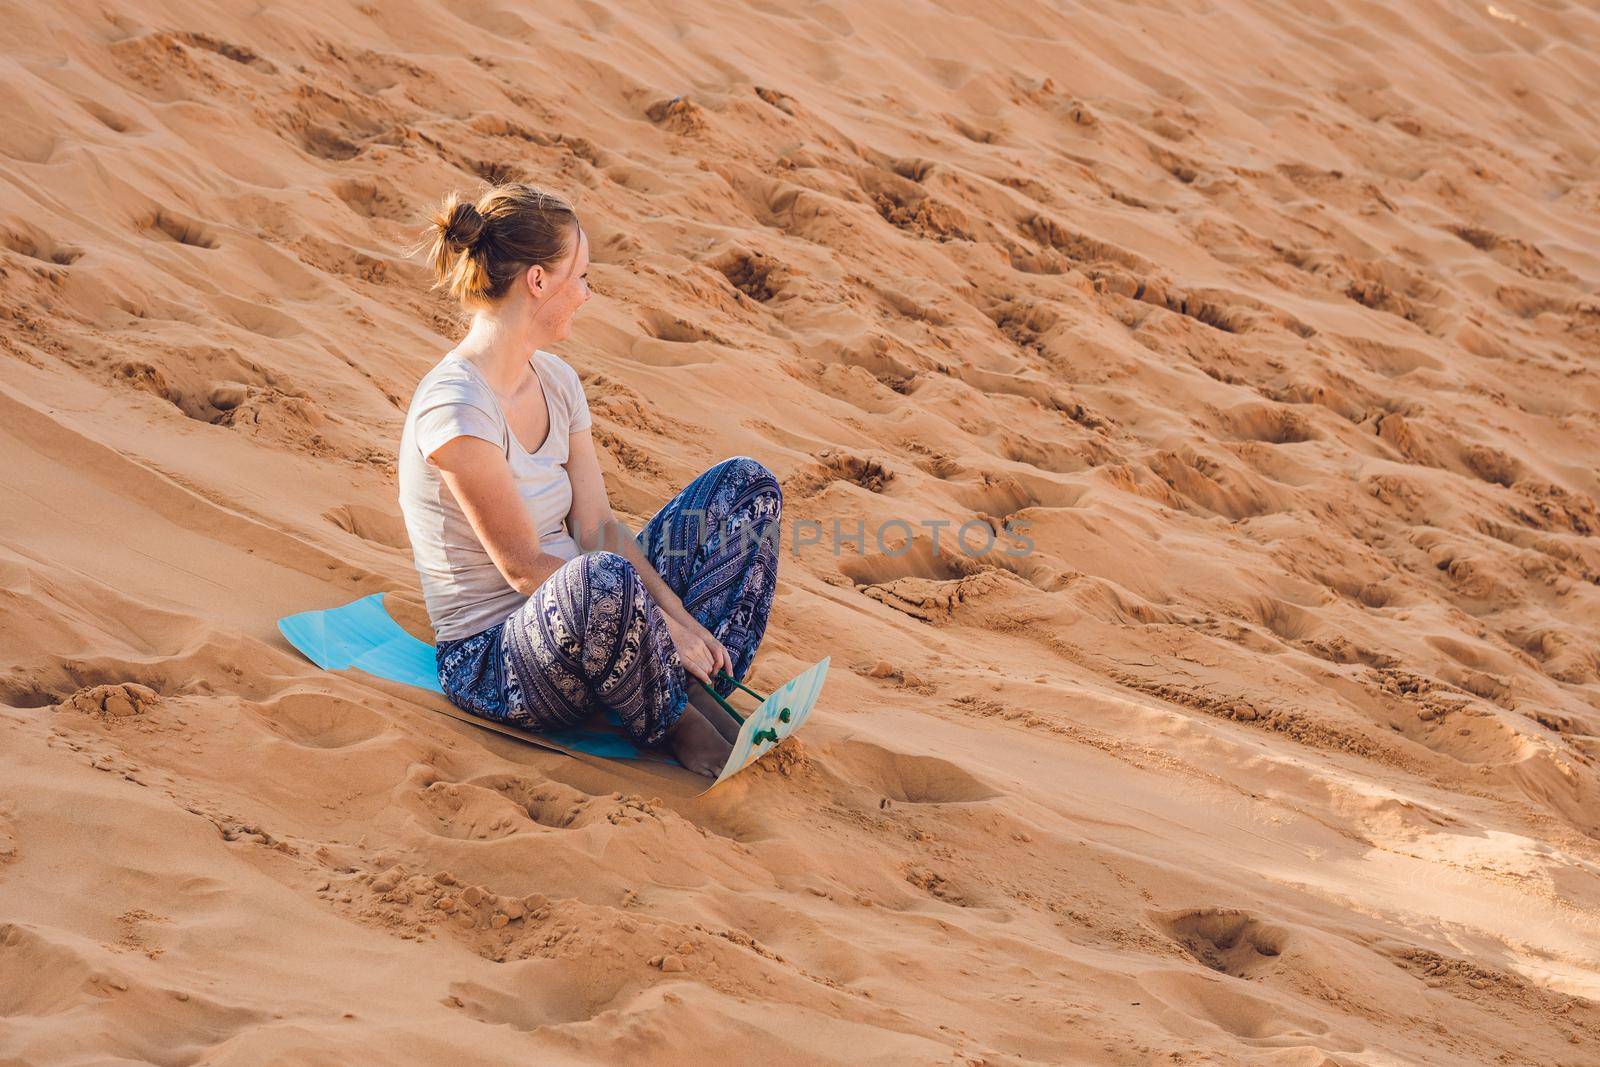 Young woman rolls on a toboggan in the sledge in the desert.